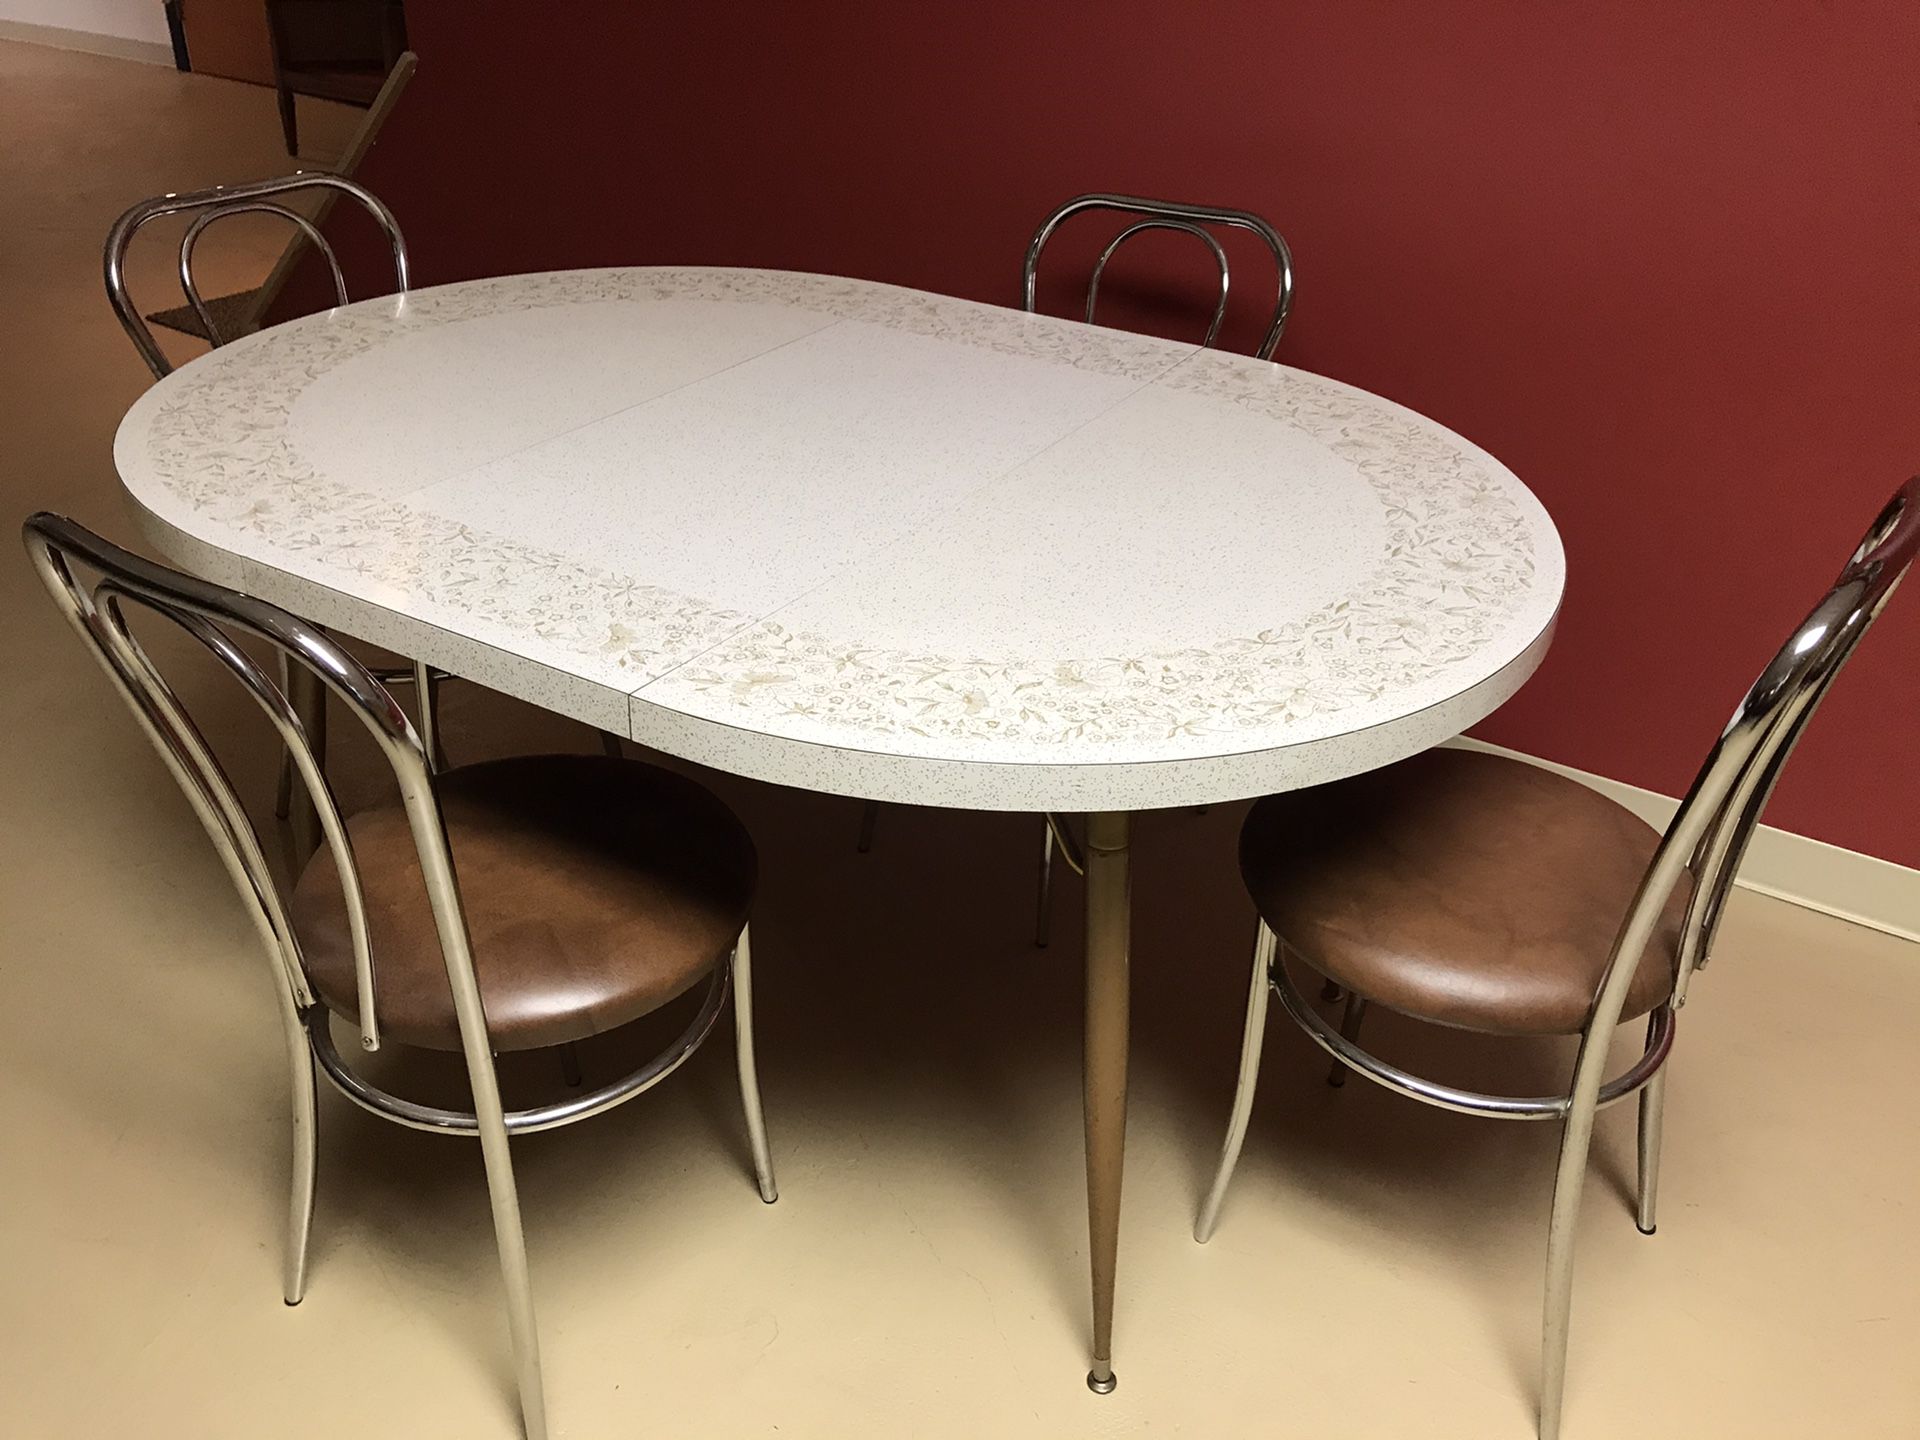 Vintage Formica topped table and chairs